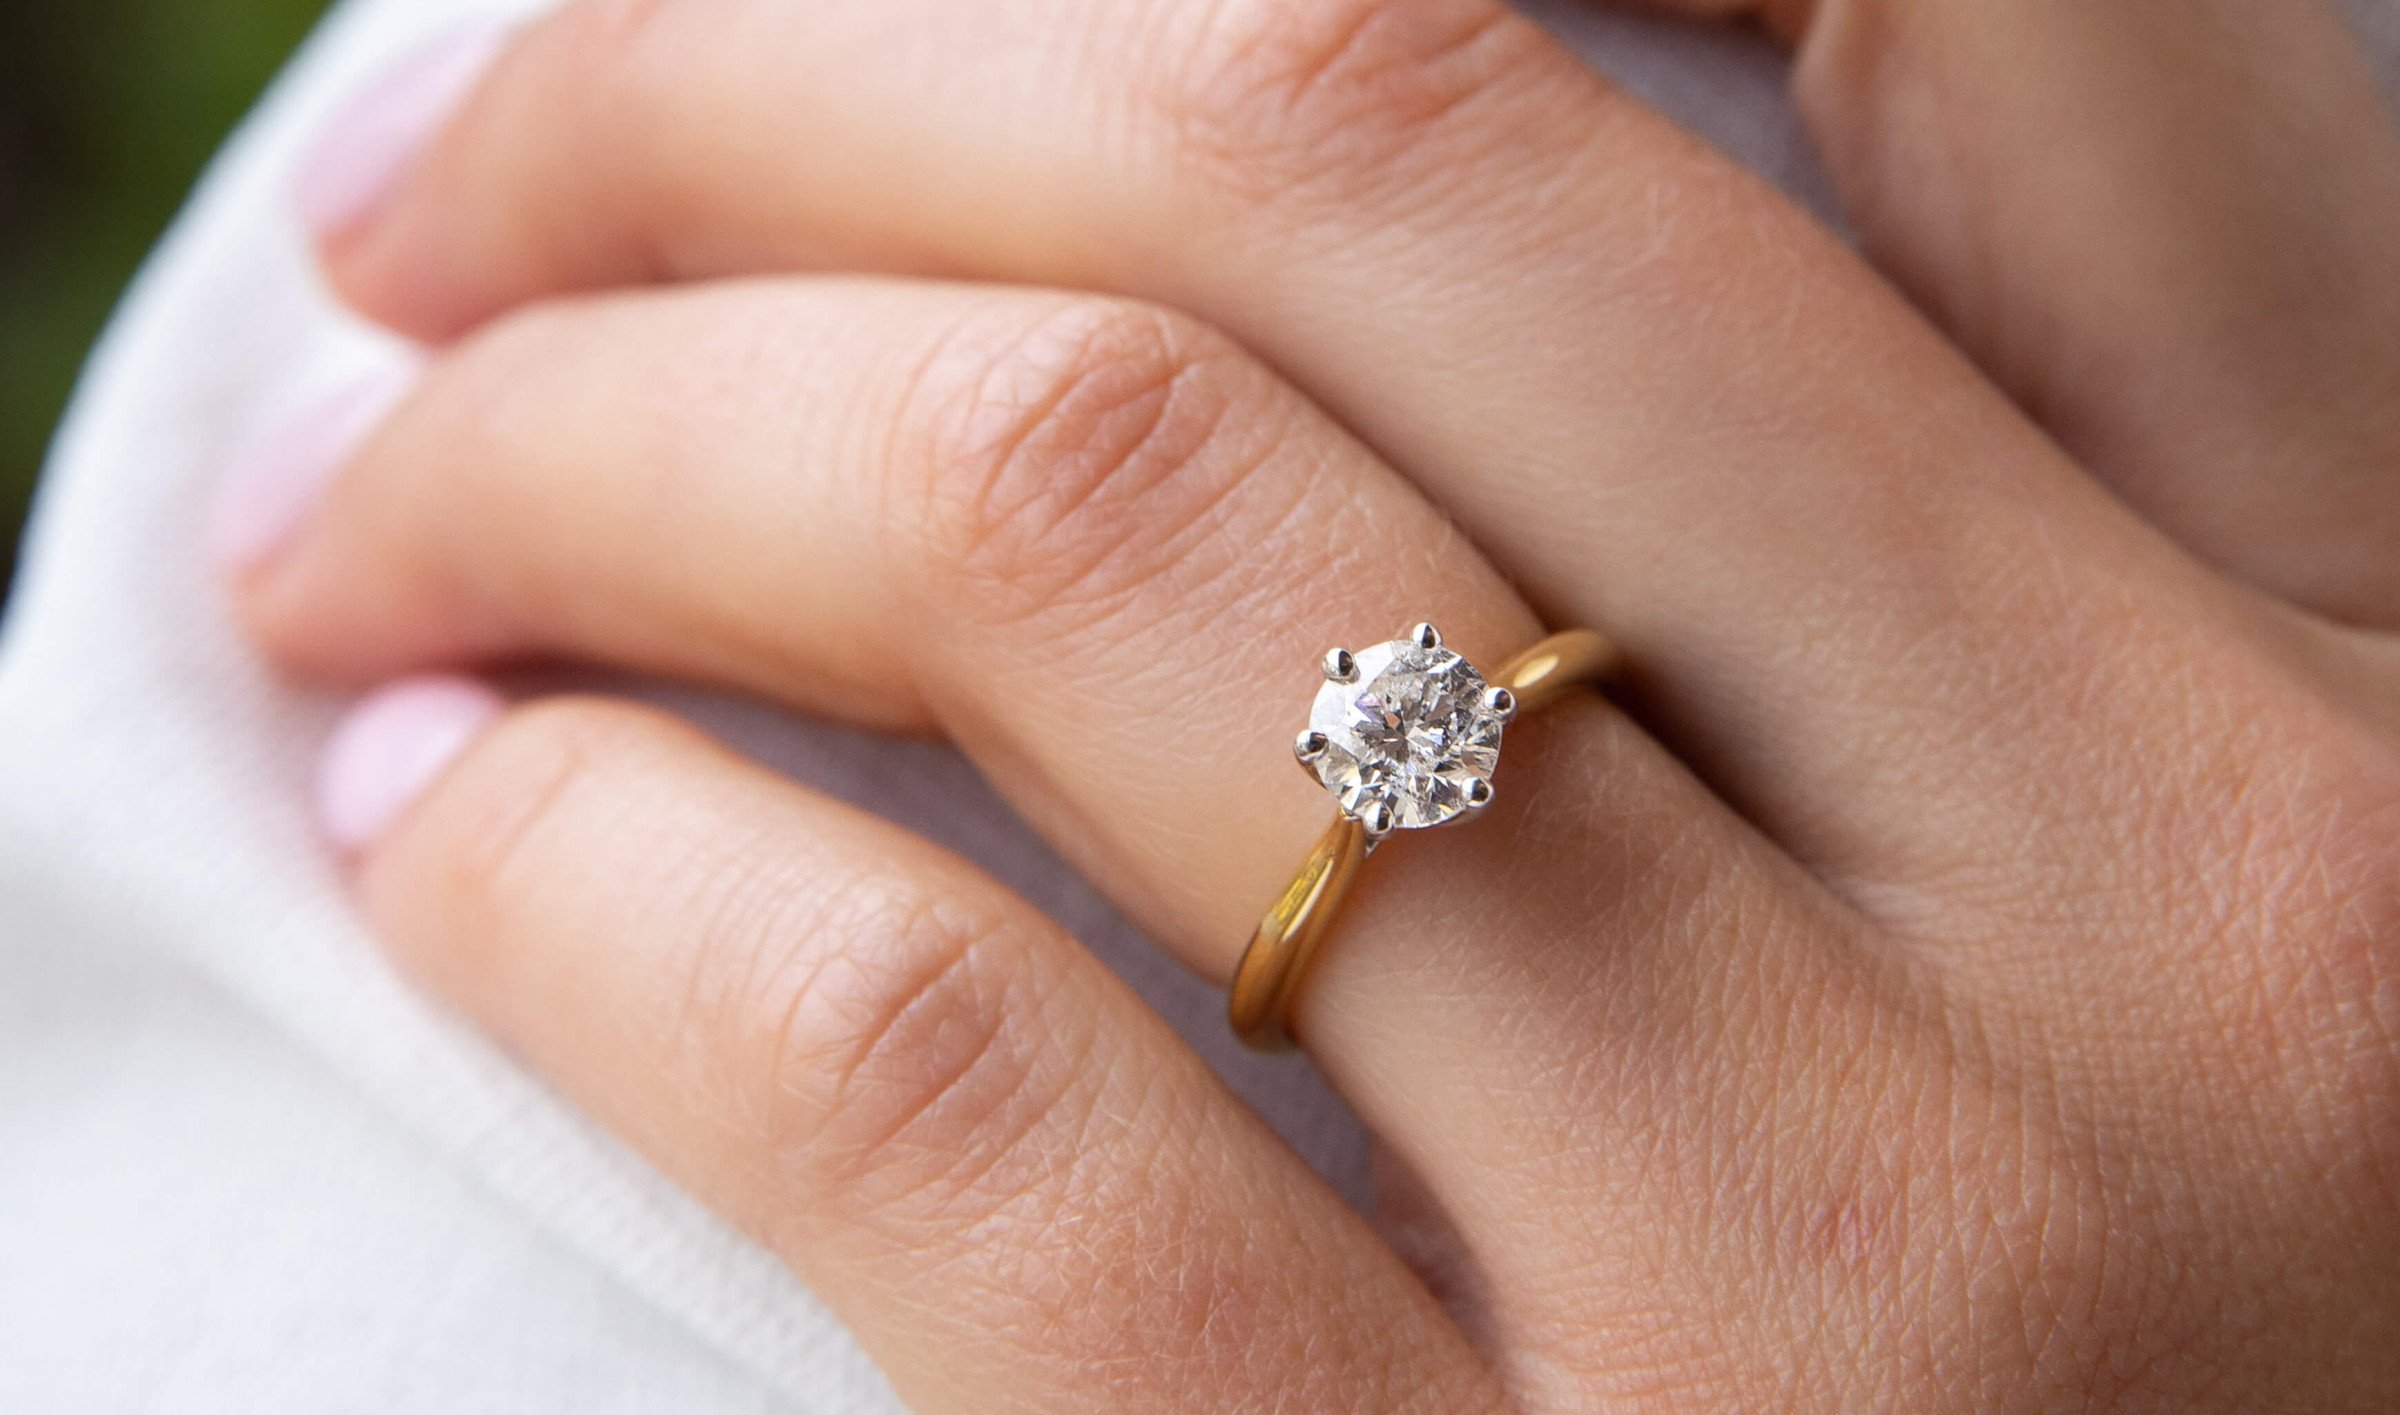 Size Matters! How To Make Your Diamond Look Bigger